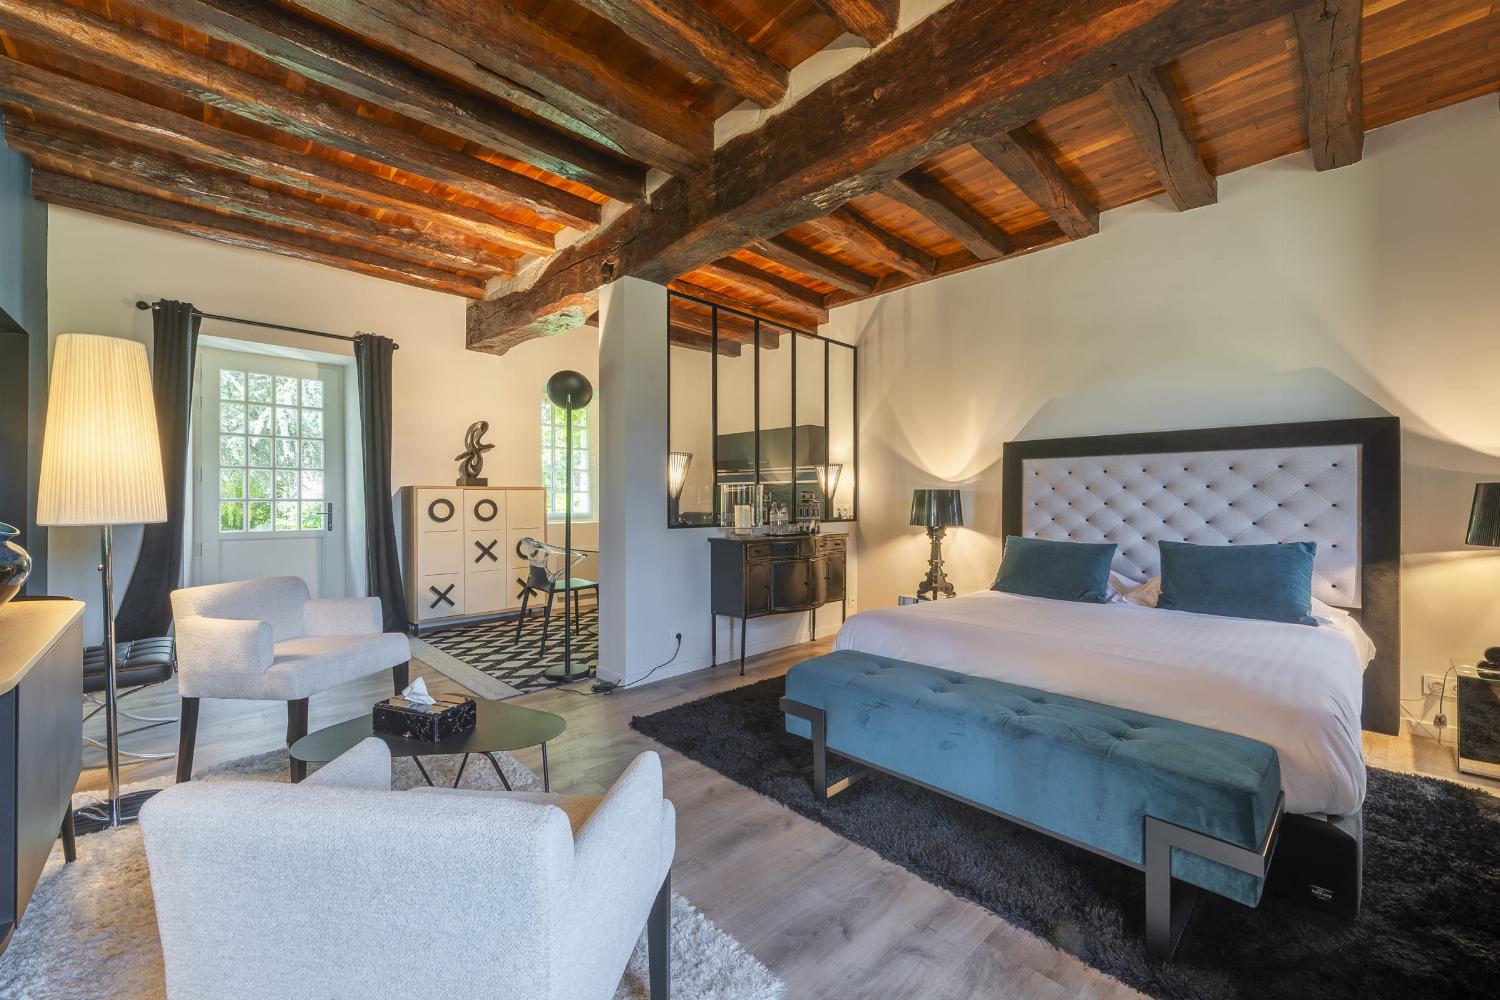 Ground floor bedroom | Holiday château in Loire Valley